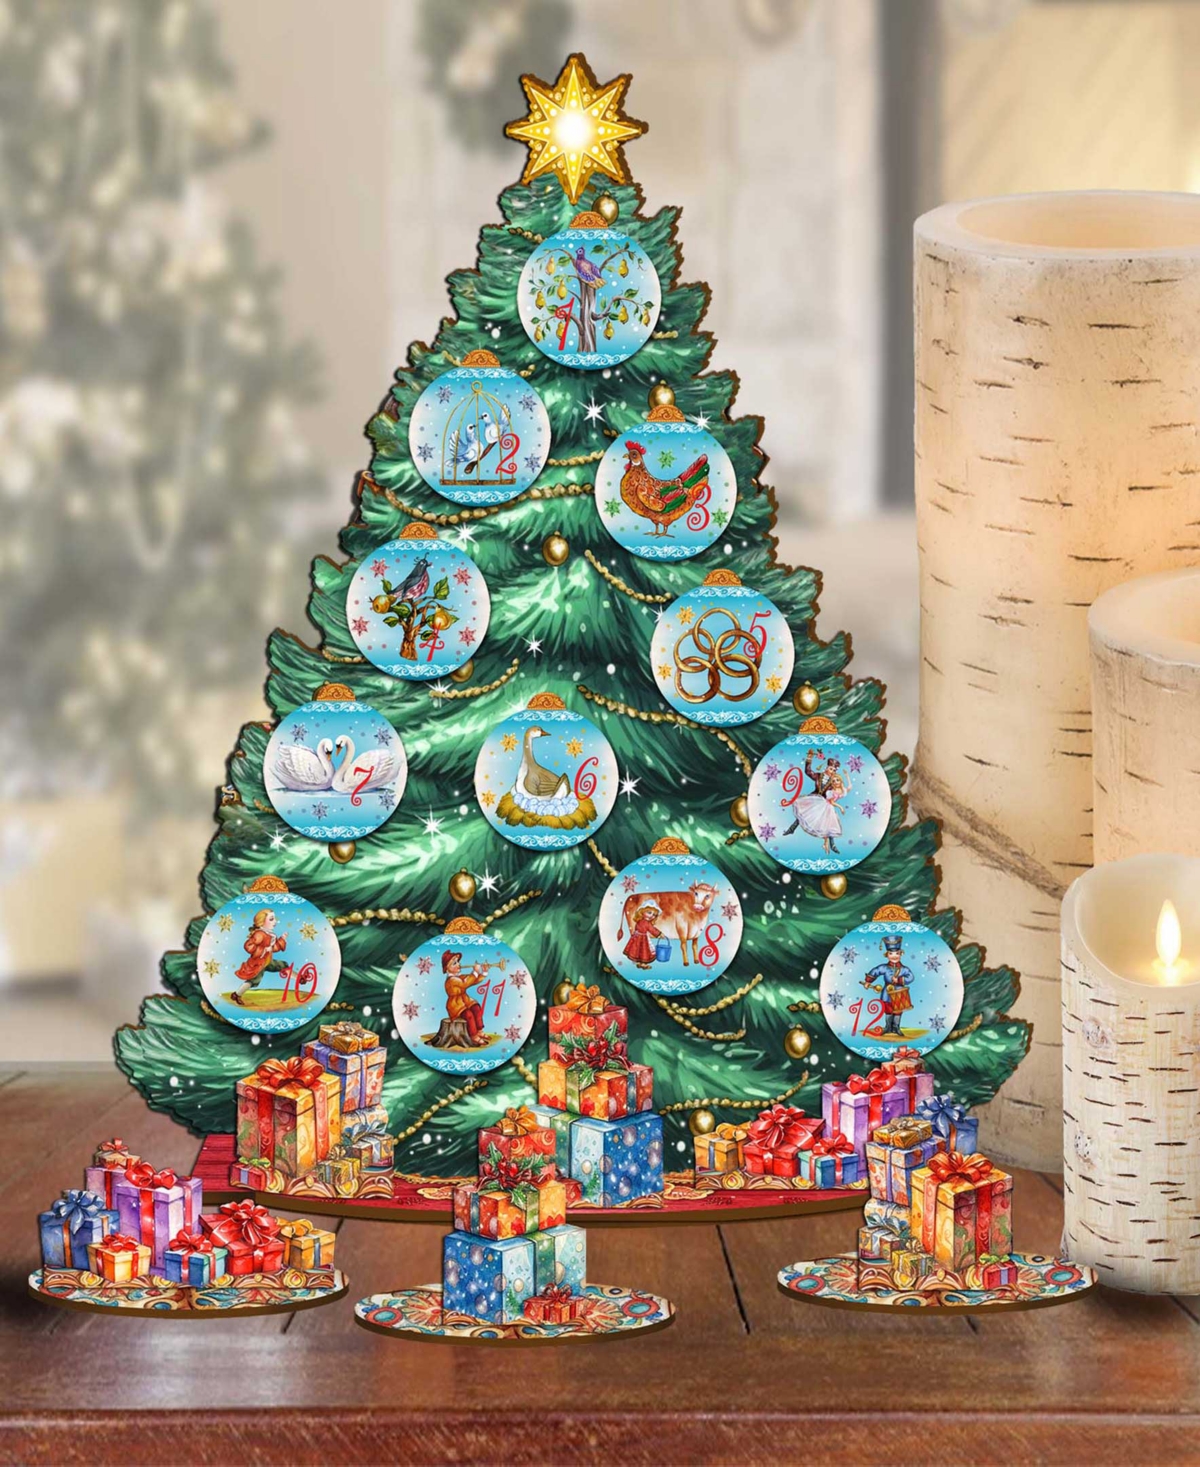 Designocracy 12 Days Themed Wooden Christmas Tree With Ornaments Set Of 19 G. Debrekht In Multi Color